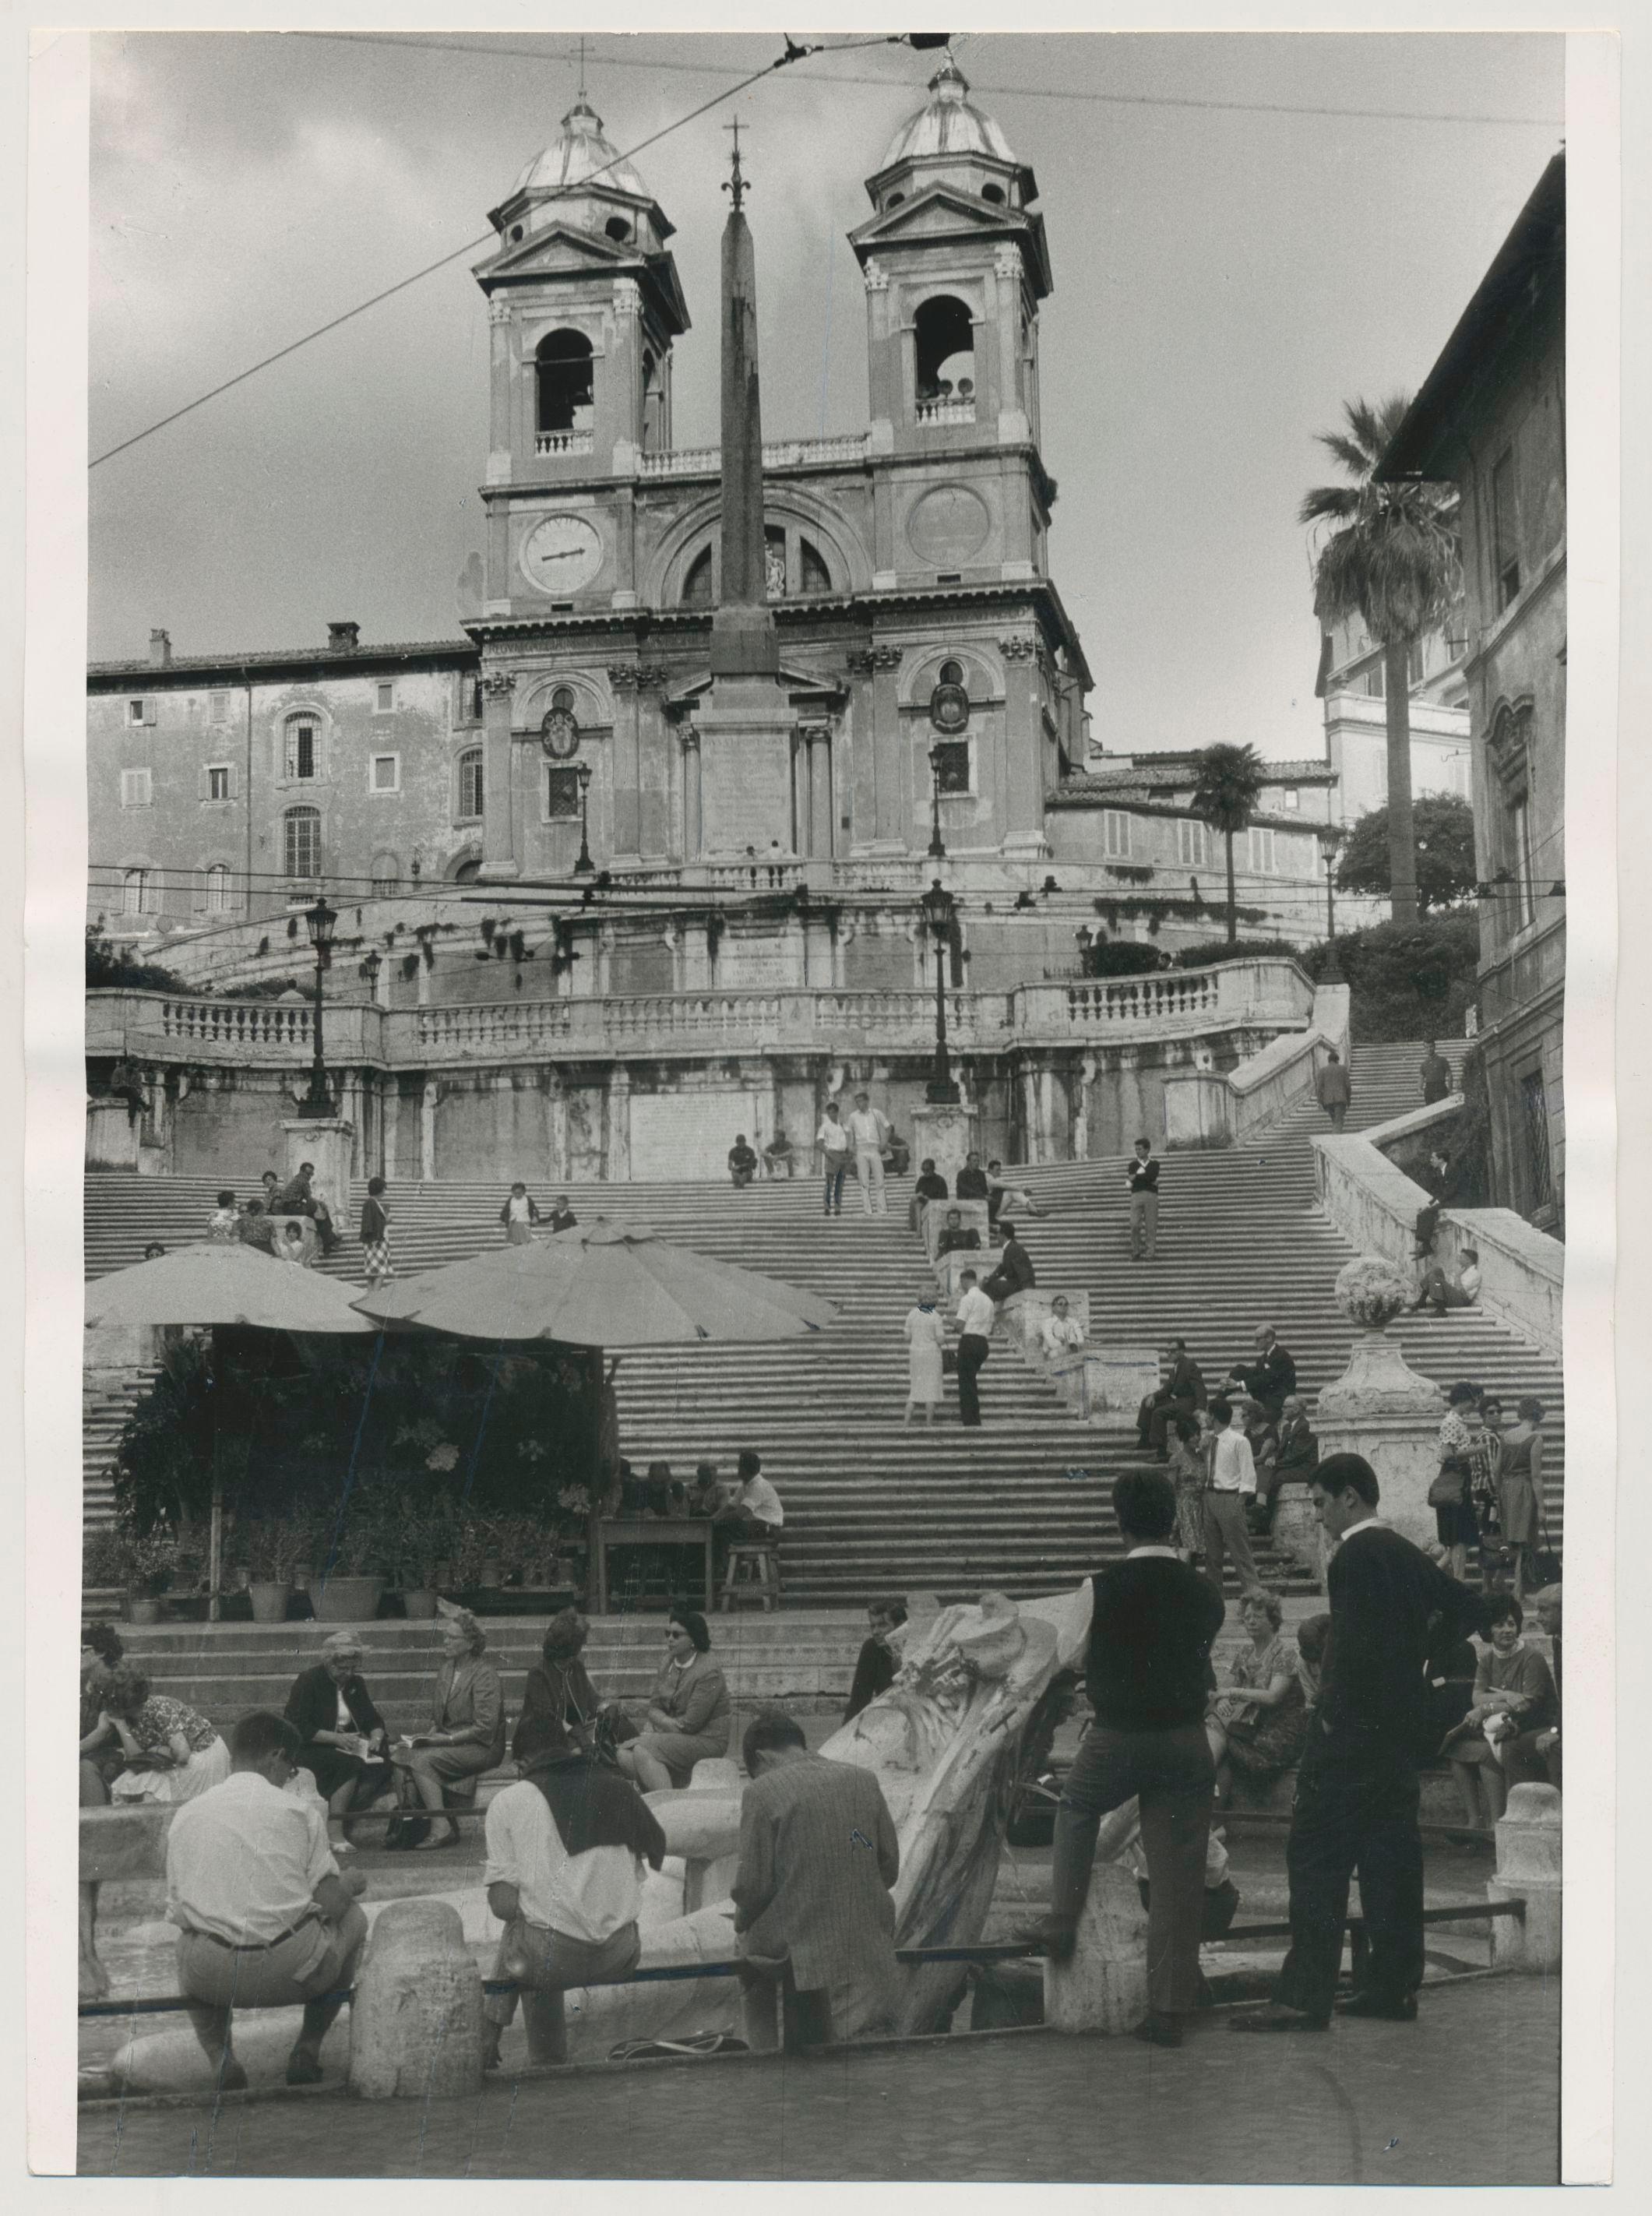 Erich Andres Black and White Photograph - Rome - Spanish Steps, Italy 1950s, 23, 2 x 17, 3 cm